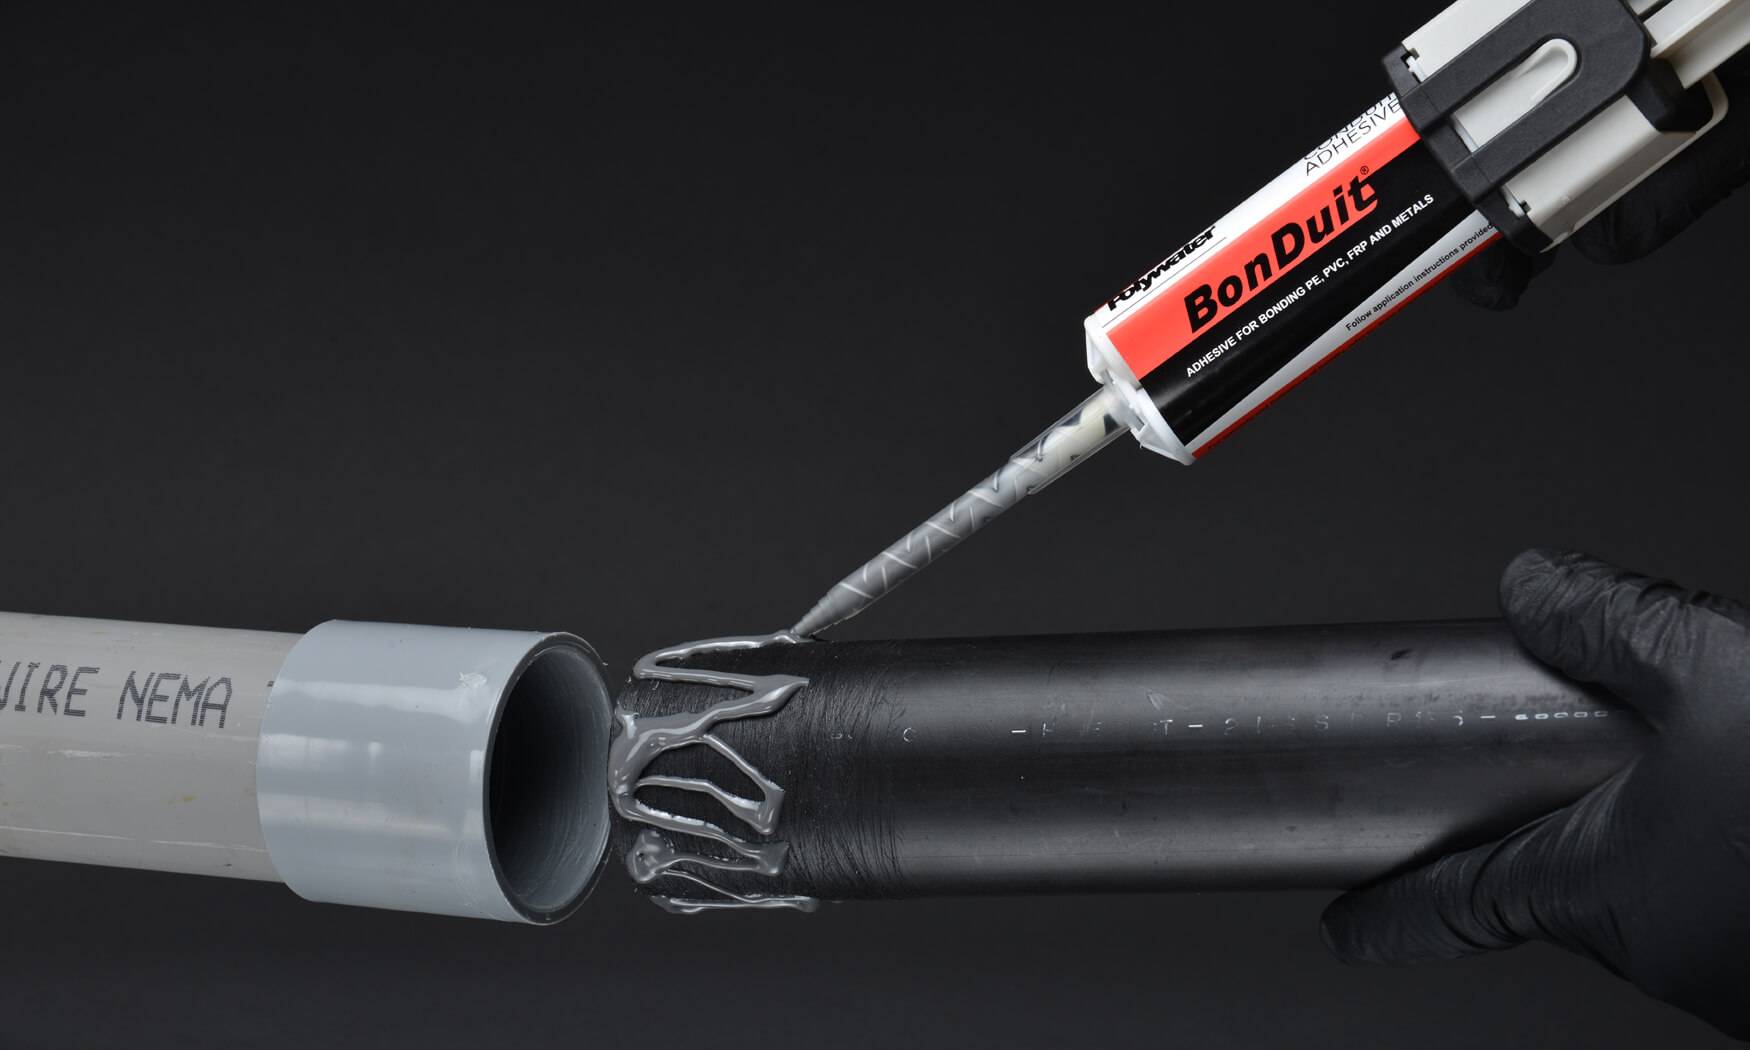 How To Glue Electrical Conduit